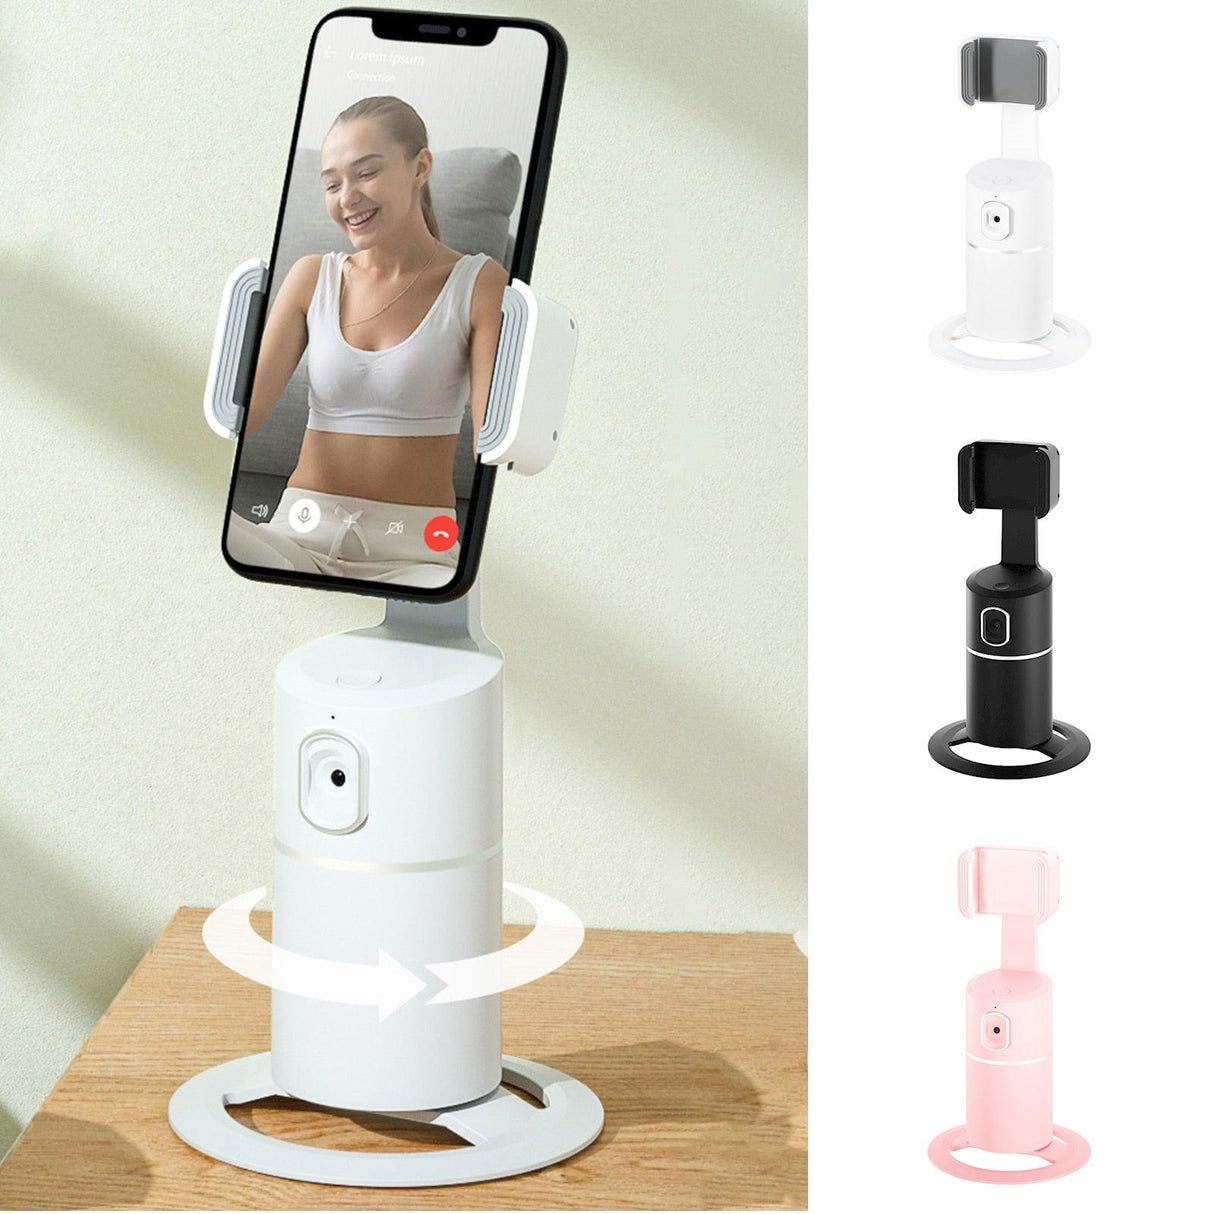 Automatic Face/Object Tracking Gimbal - Hands-Free Camera/Phone Holder for Effortless Recording & Streaming